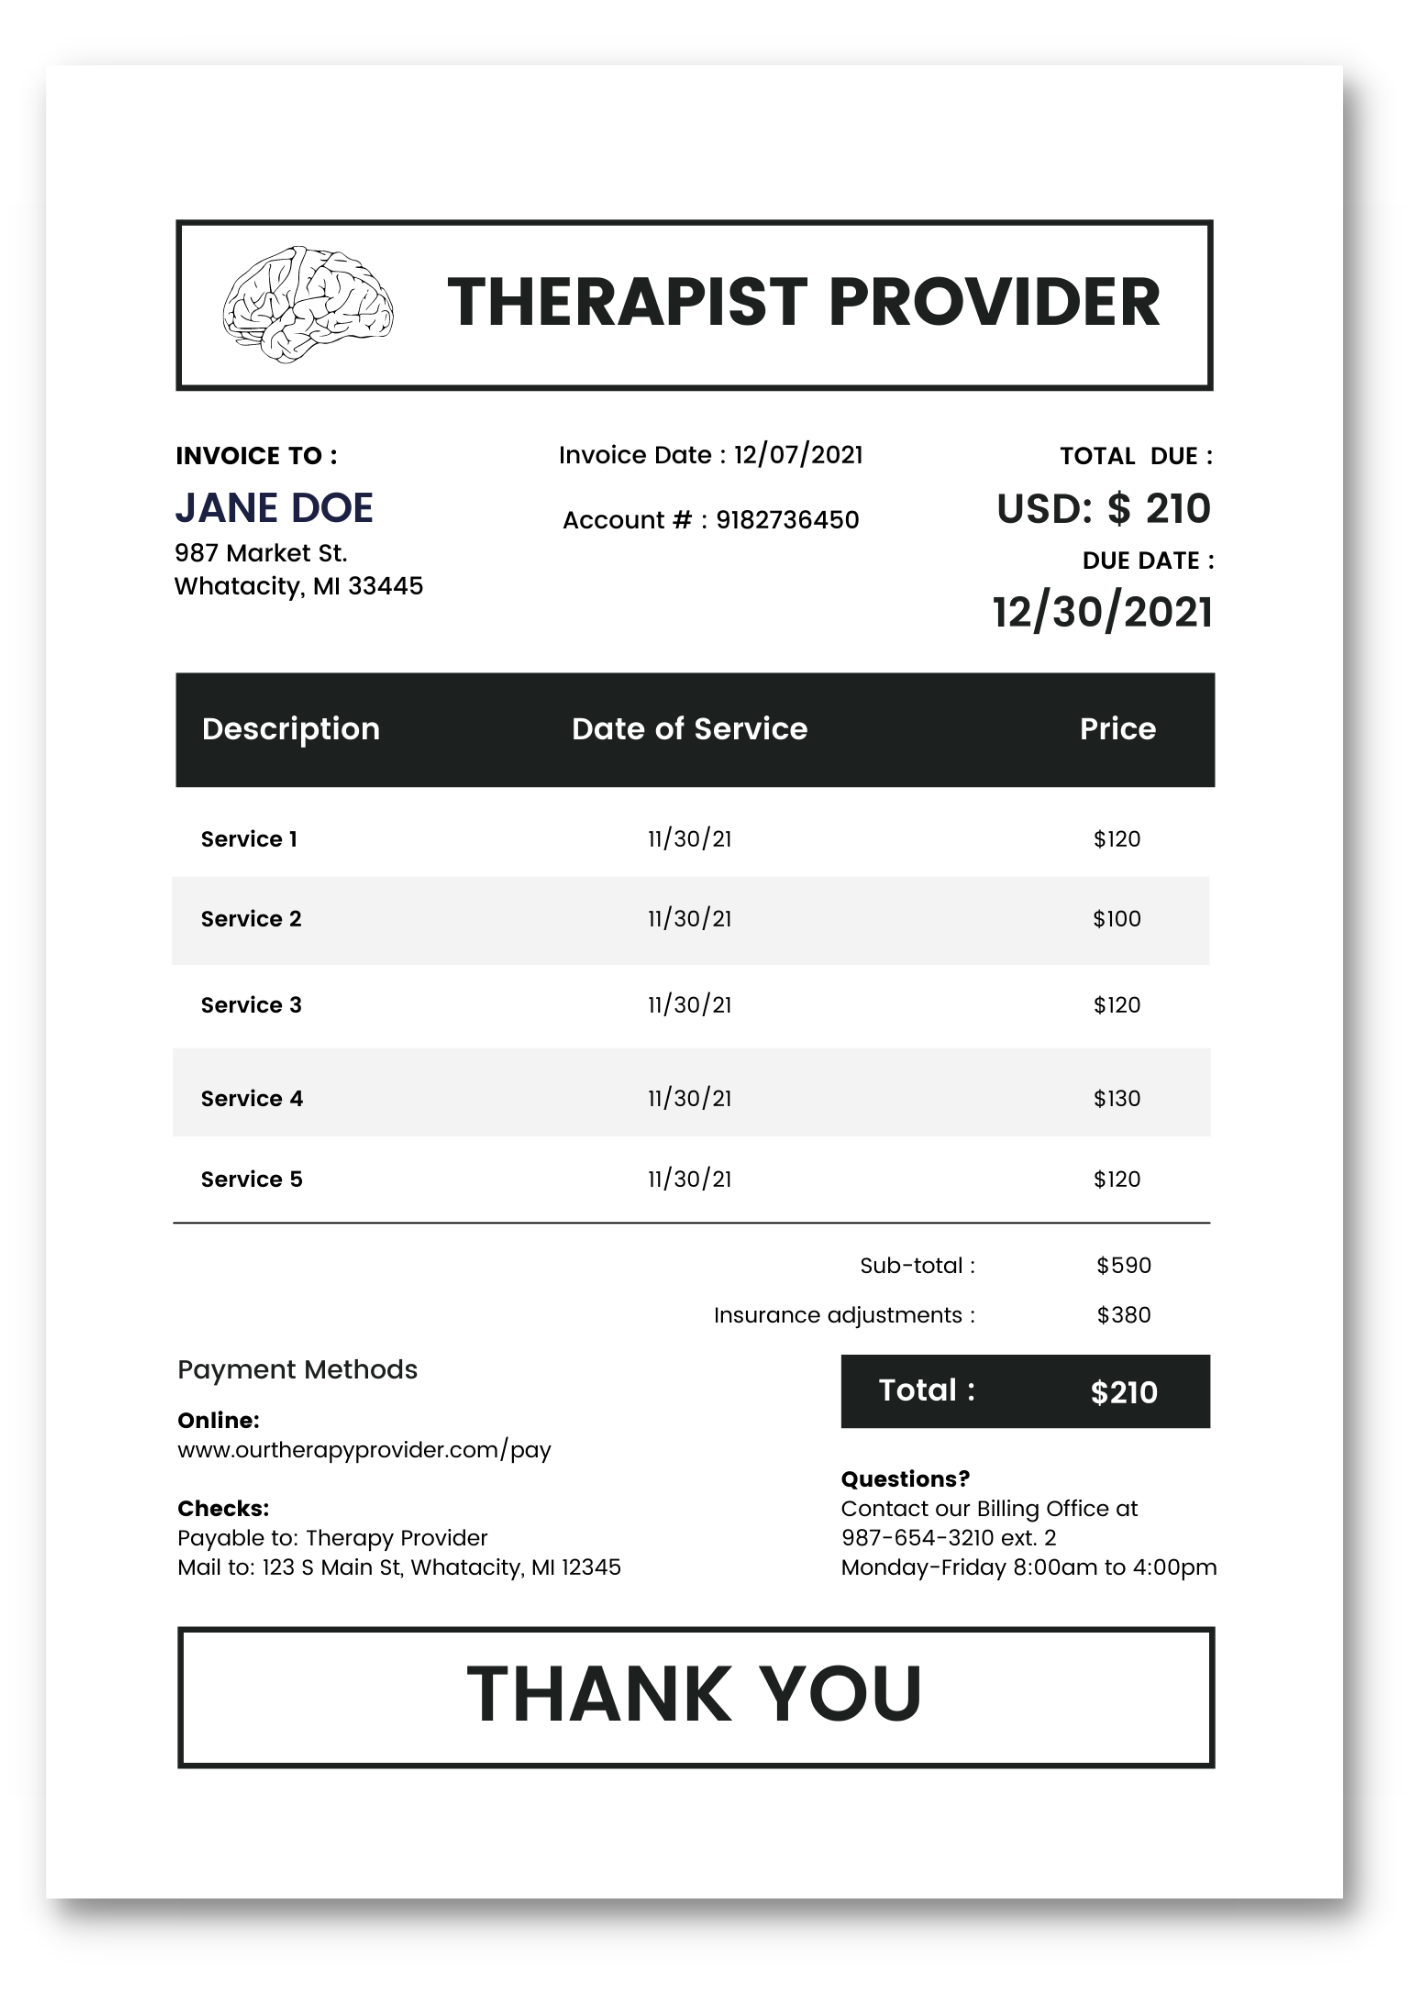 Receipt For Mental Health Services Template